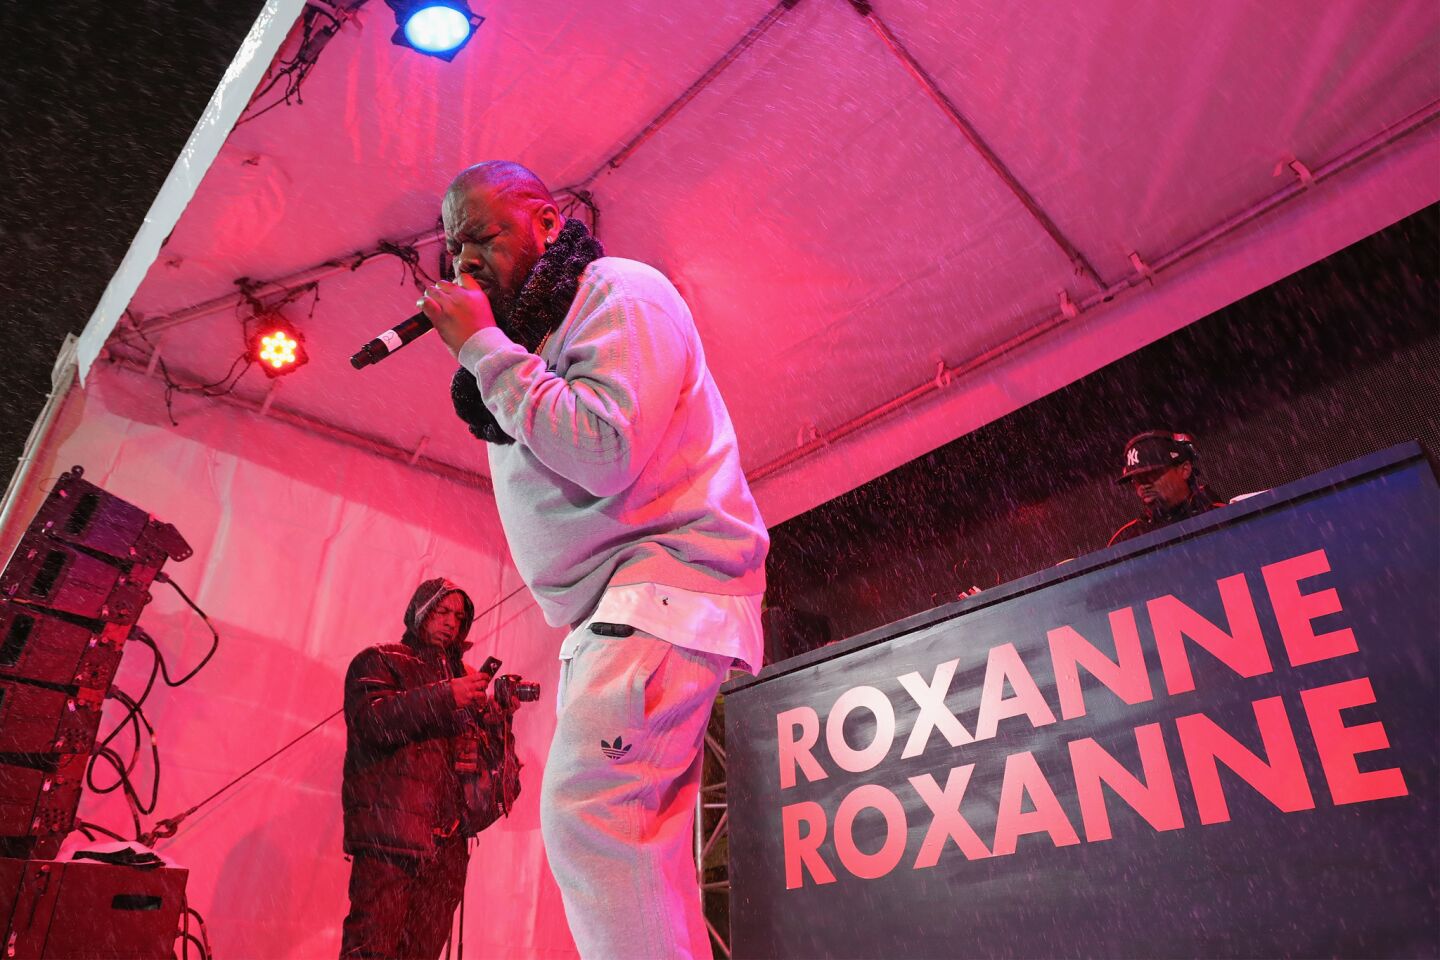 Biz Markie performs onstage at the Jan. 22 "Roxanne, Roxanne" party in the Acura Festival Village during the Sundance Film Festival in Park City, Utah.